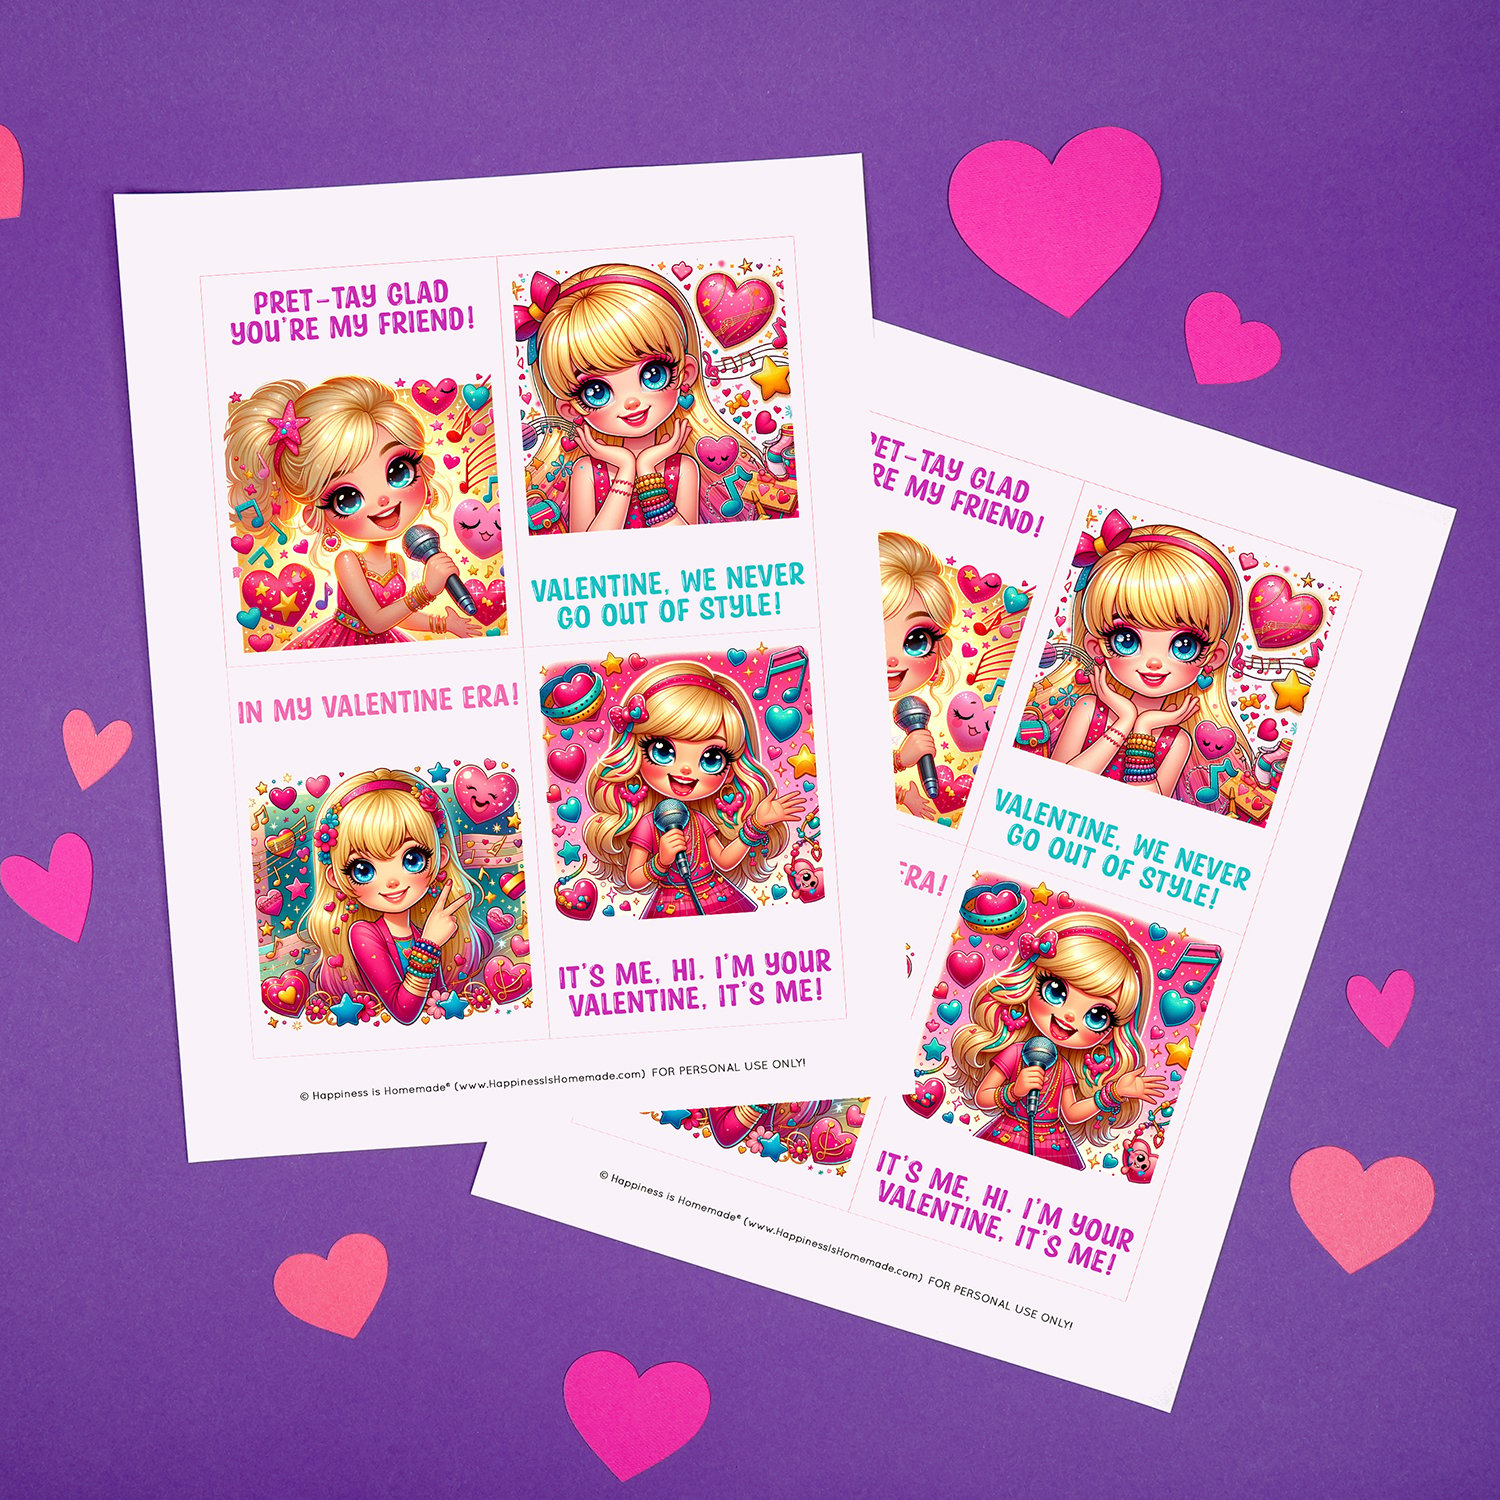 Two sheets of printable Taylor Swift-inspired Valentines cards on a purple background with pink hearts